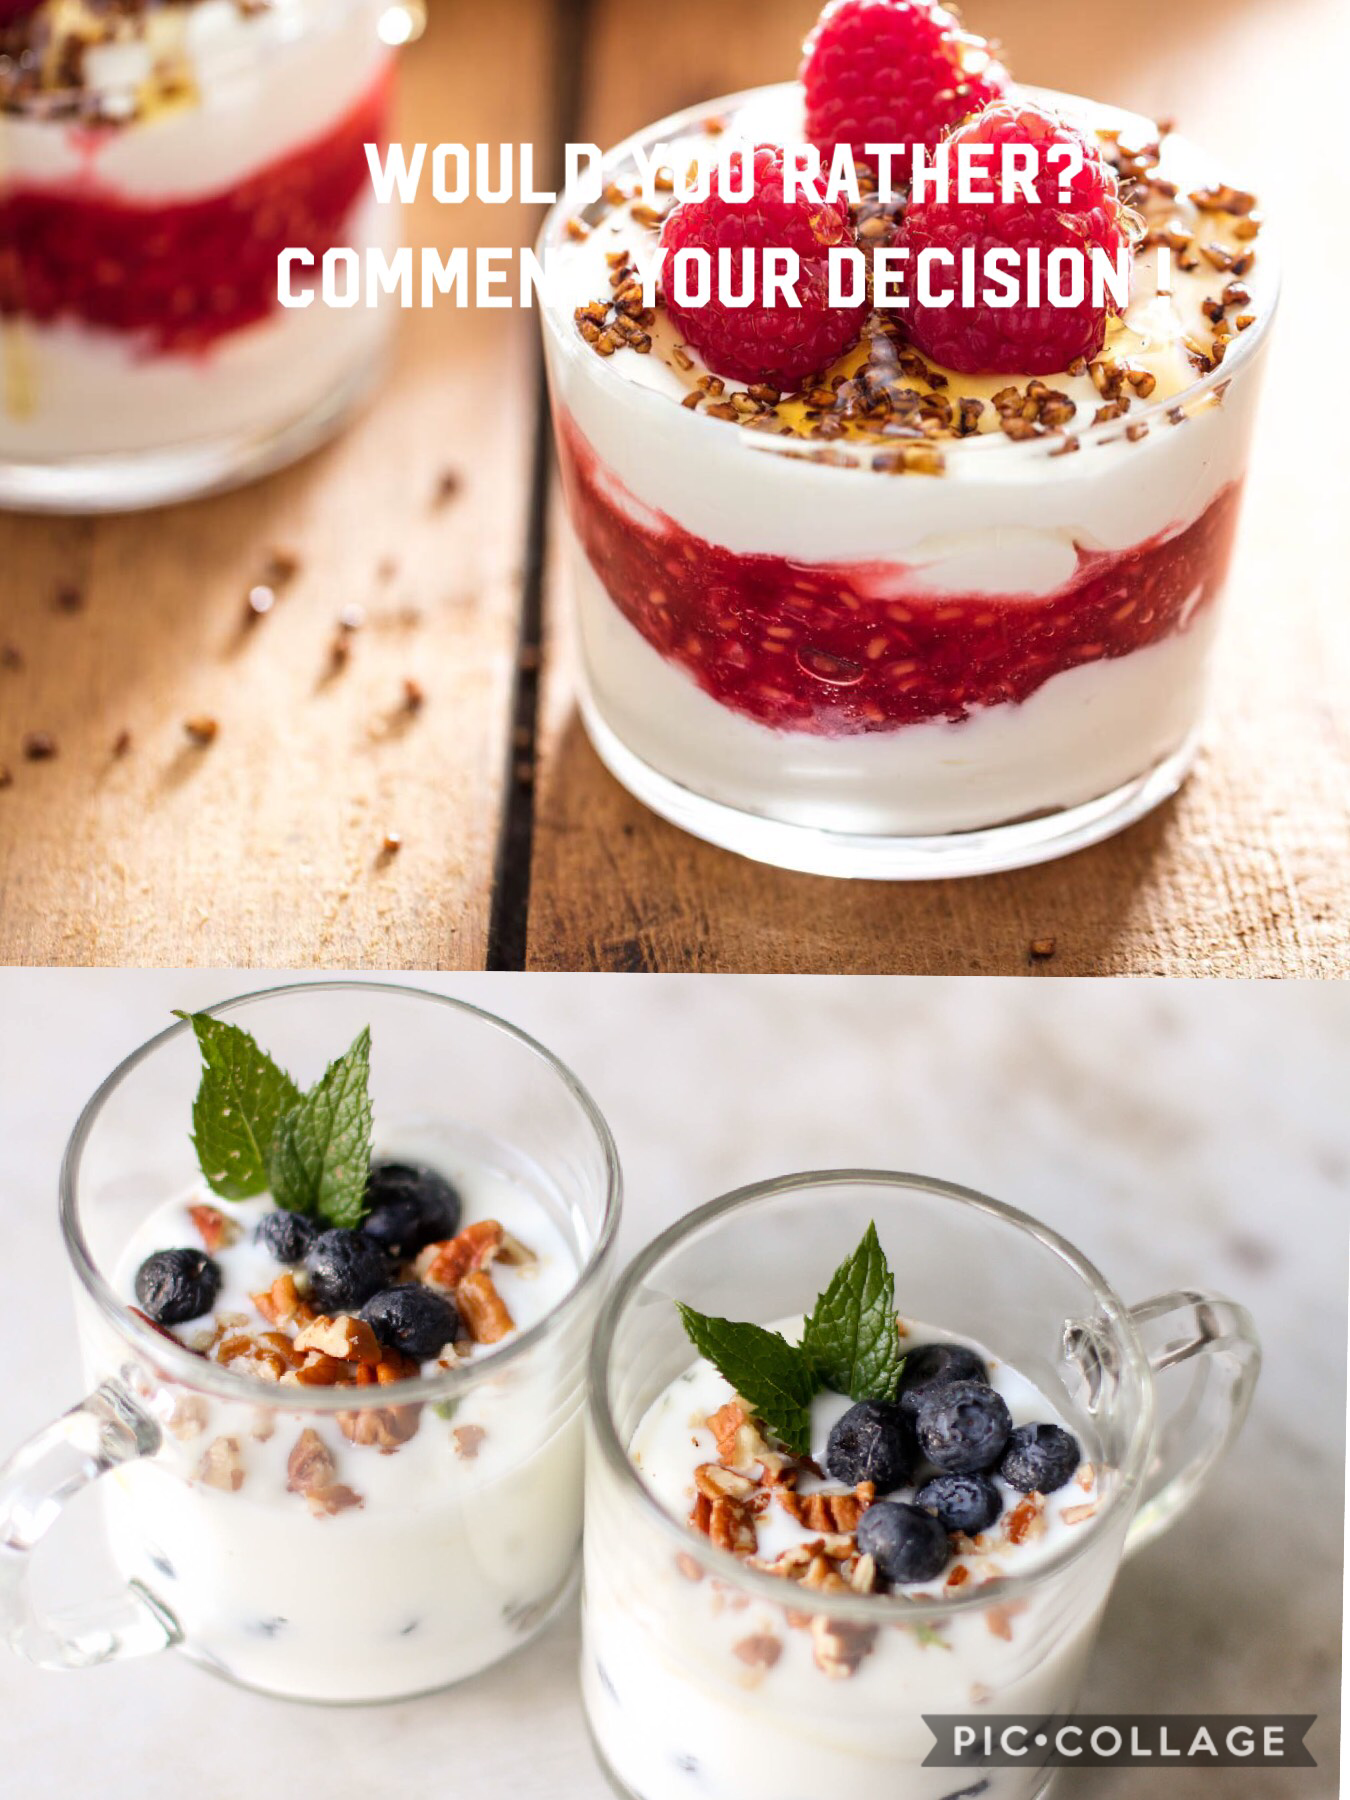 Would you rather raspberry or blueberry dessert? Plz comment your decision!